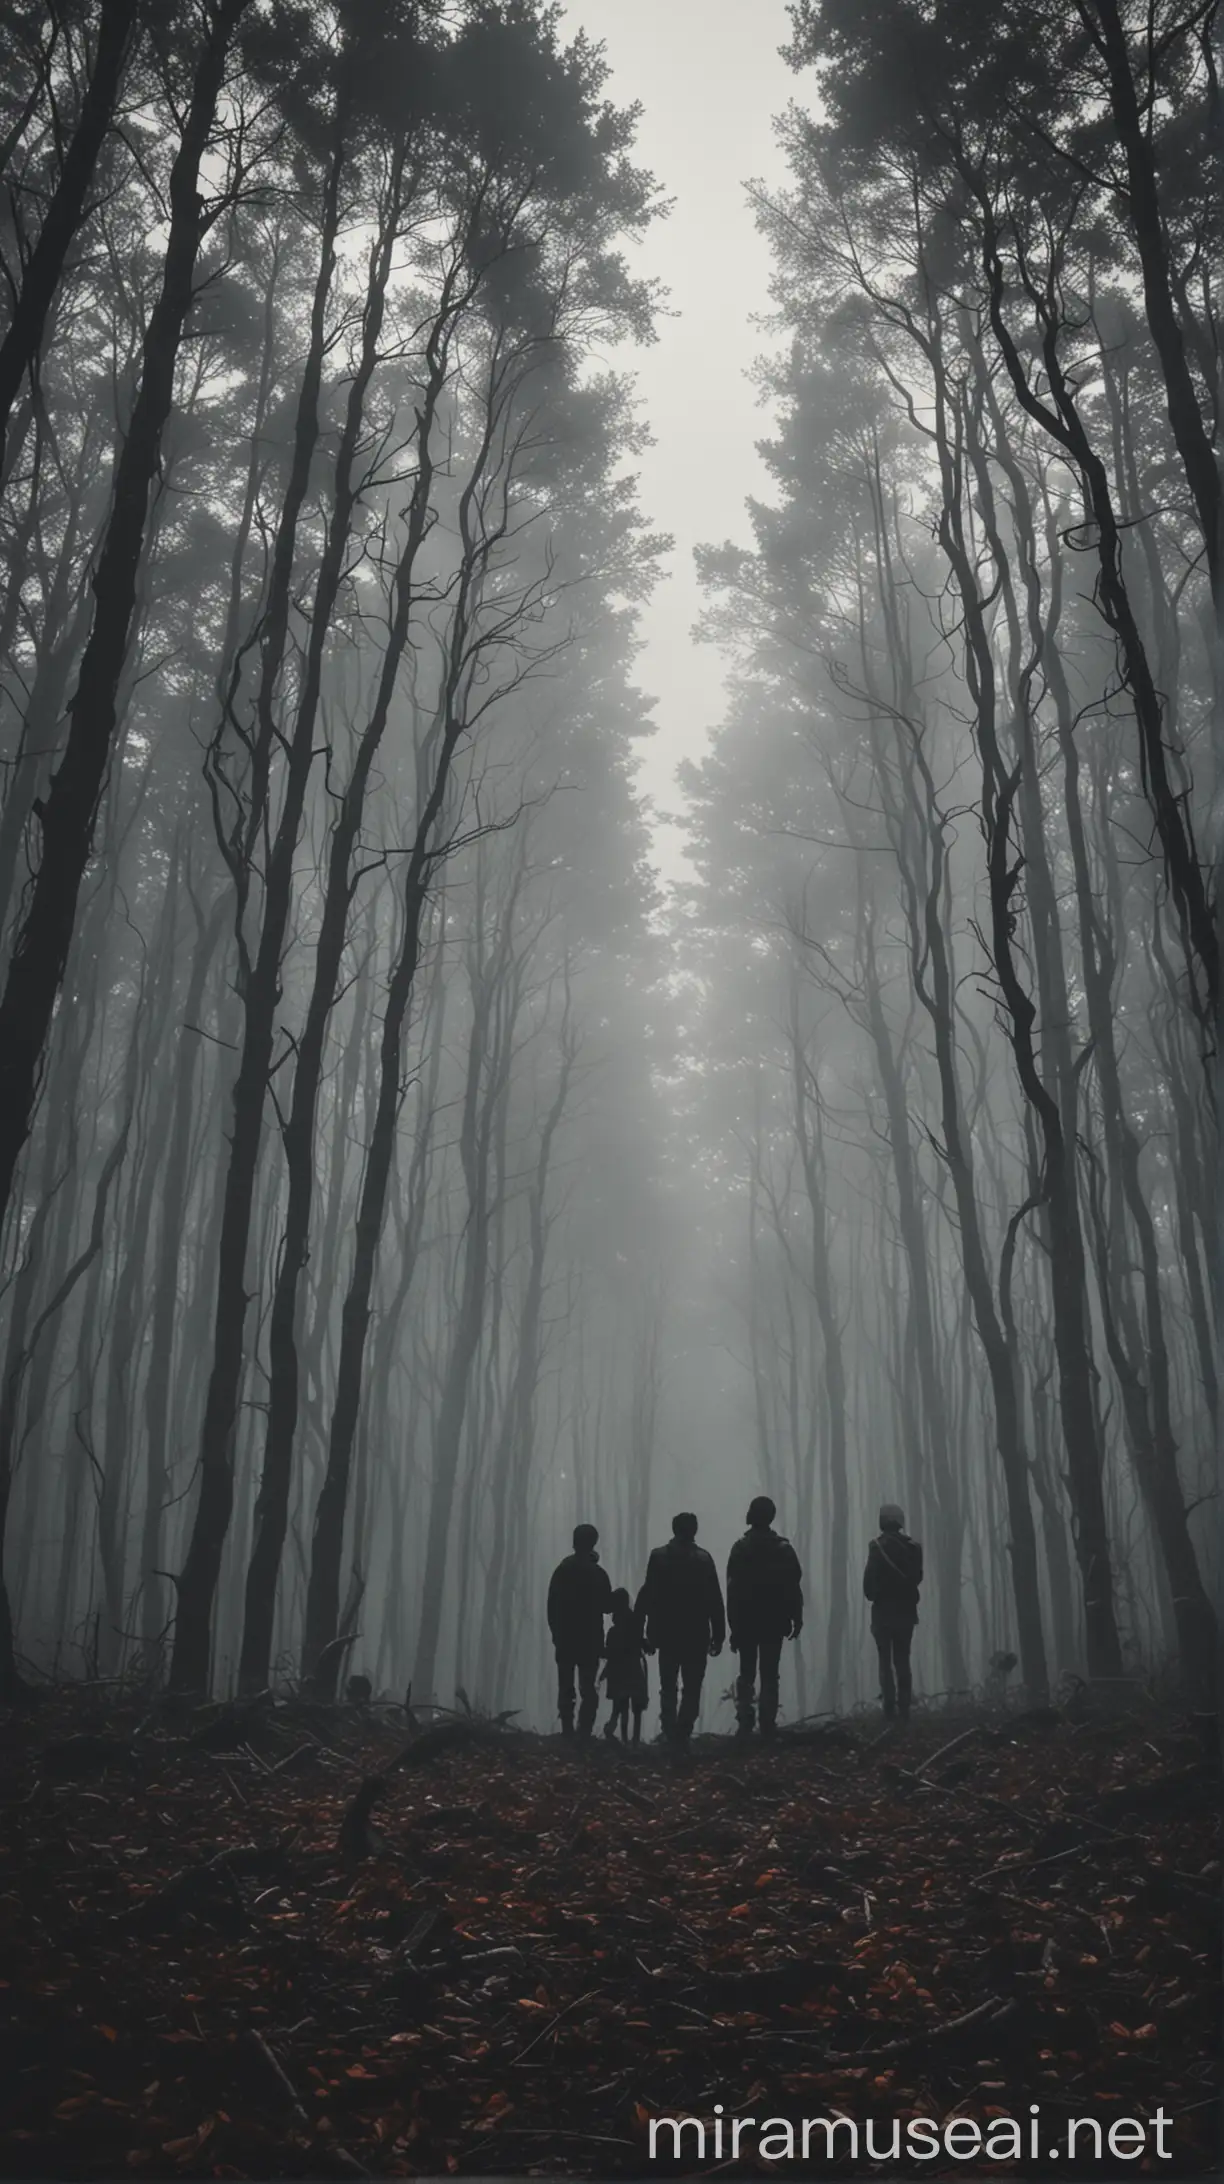 Silhouettes of People in Gloomy Forest